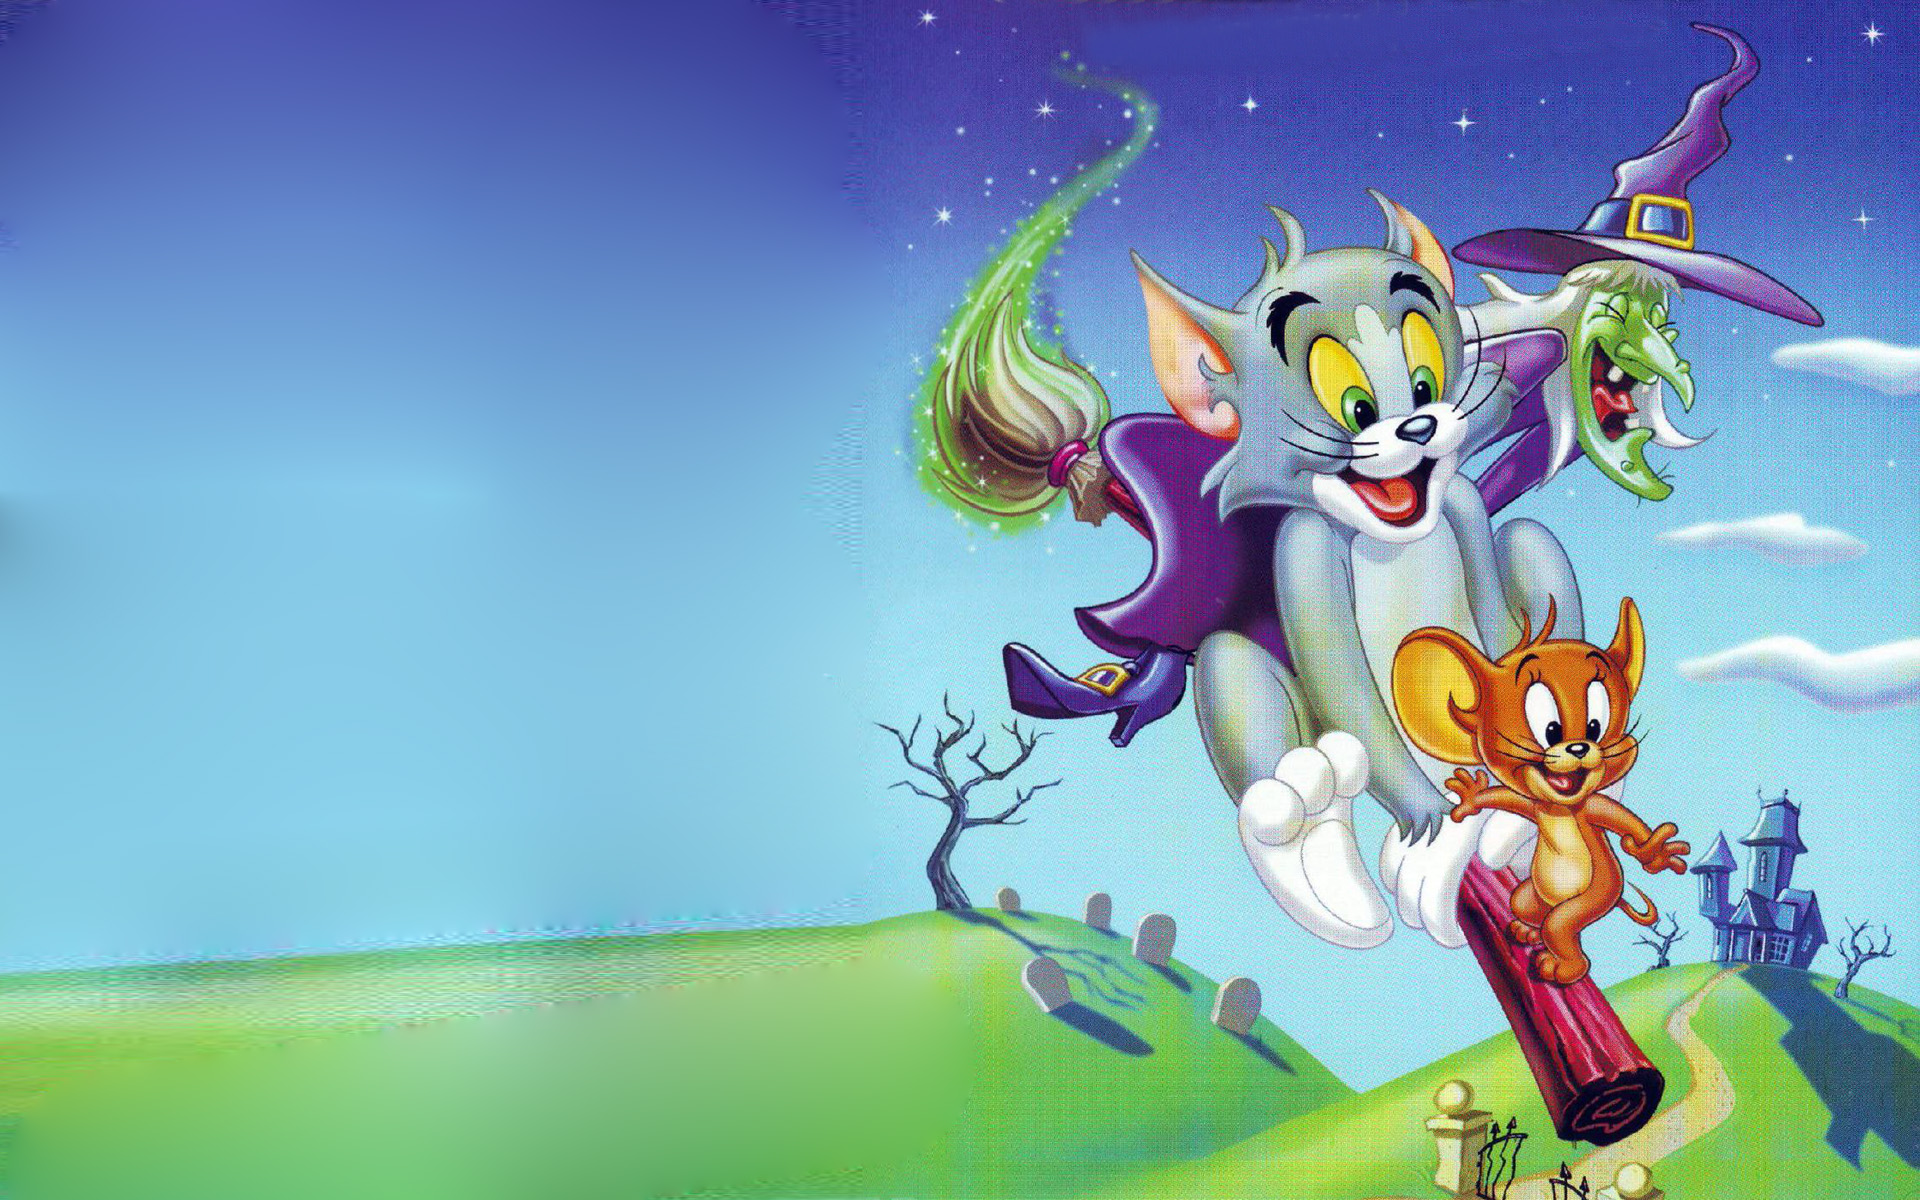 Tom And Jerry Thrills And Chills Hd Wallpaper 1920x1200 : Wallpapers13.com